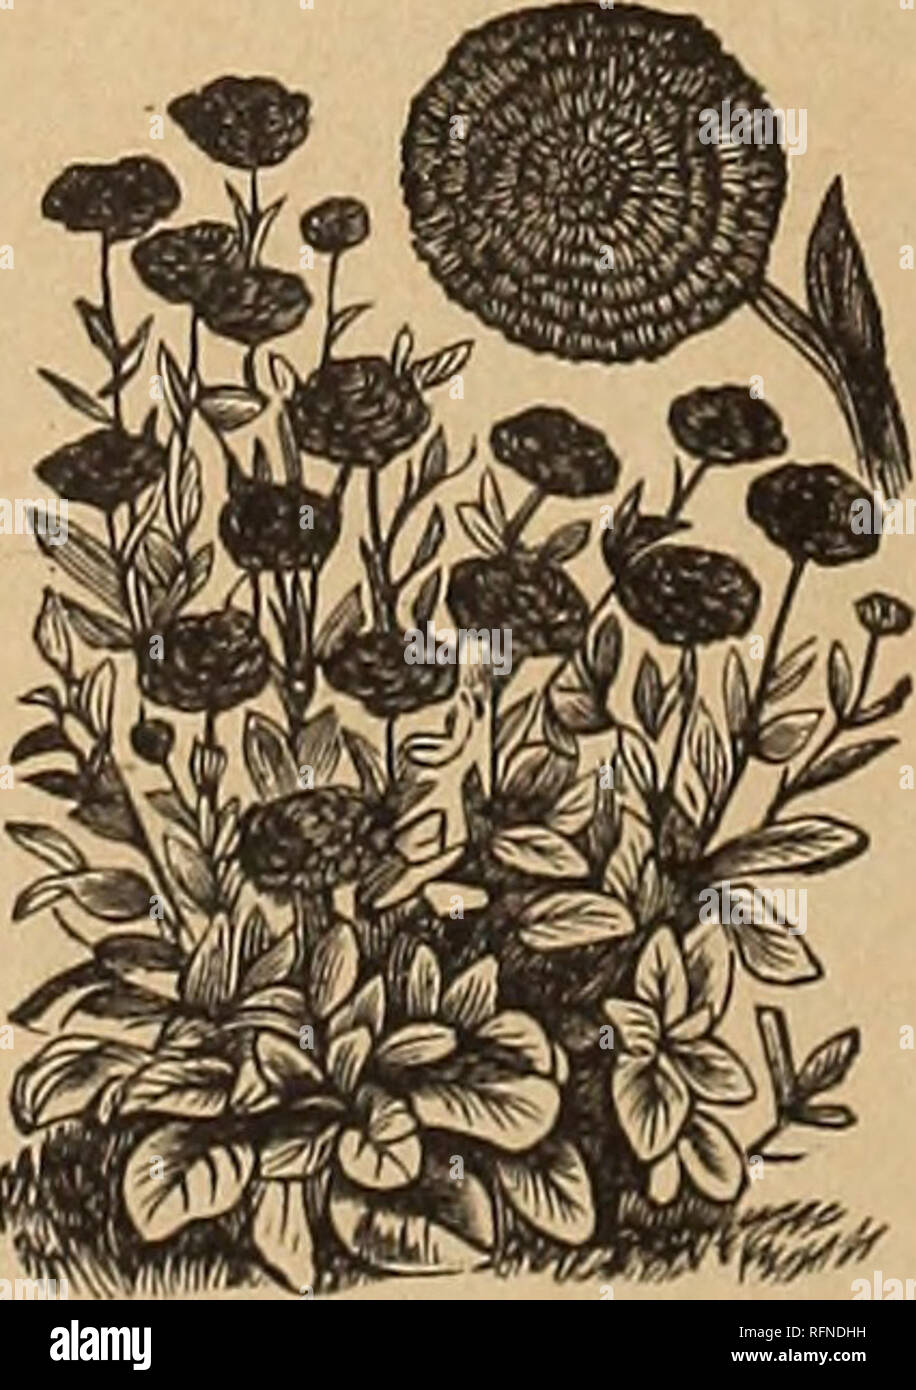 . Nebraska Seed Co.'s annual catalogue : reliable garden and farm seeds. Nursery stock Nebraska Omaha Catalogs; Flowers Seeds Catalogs; Vegetables Seeds Catalogs. 28. Bellis, double, mixed.. .10c CALANDRIN1A. Fine dwarfplants for growing in masses. They are well suited for edgings, rockeries and clumps. Tender, annual but per- ennial if protected in winter. One-half to one foot high. 29. Calandrinia, Grandiflora— Rosy lilac 5c 80. Calandrinia, Umbellata— Crimson 5c CALENDULA-Cape Marigold. Attractive and free-blooming, hardy annuals, doing well in al- most any situation. The Pot Marigold, C. P Stock Photo